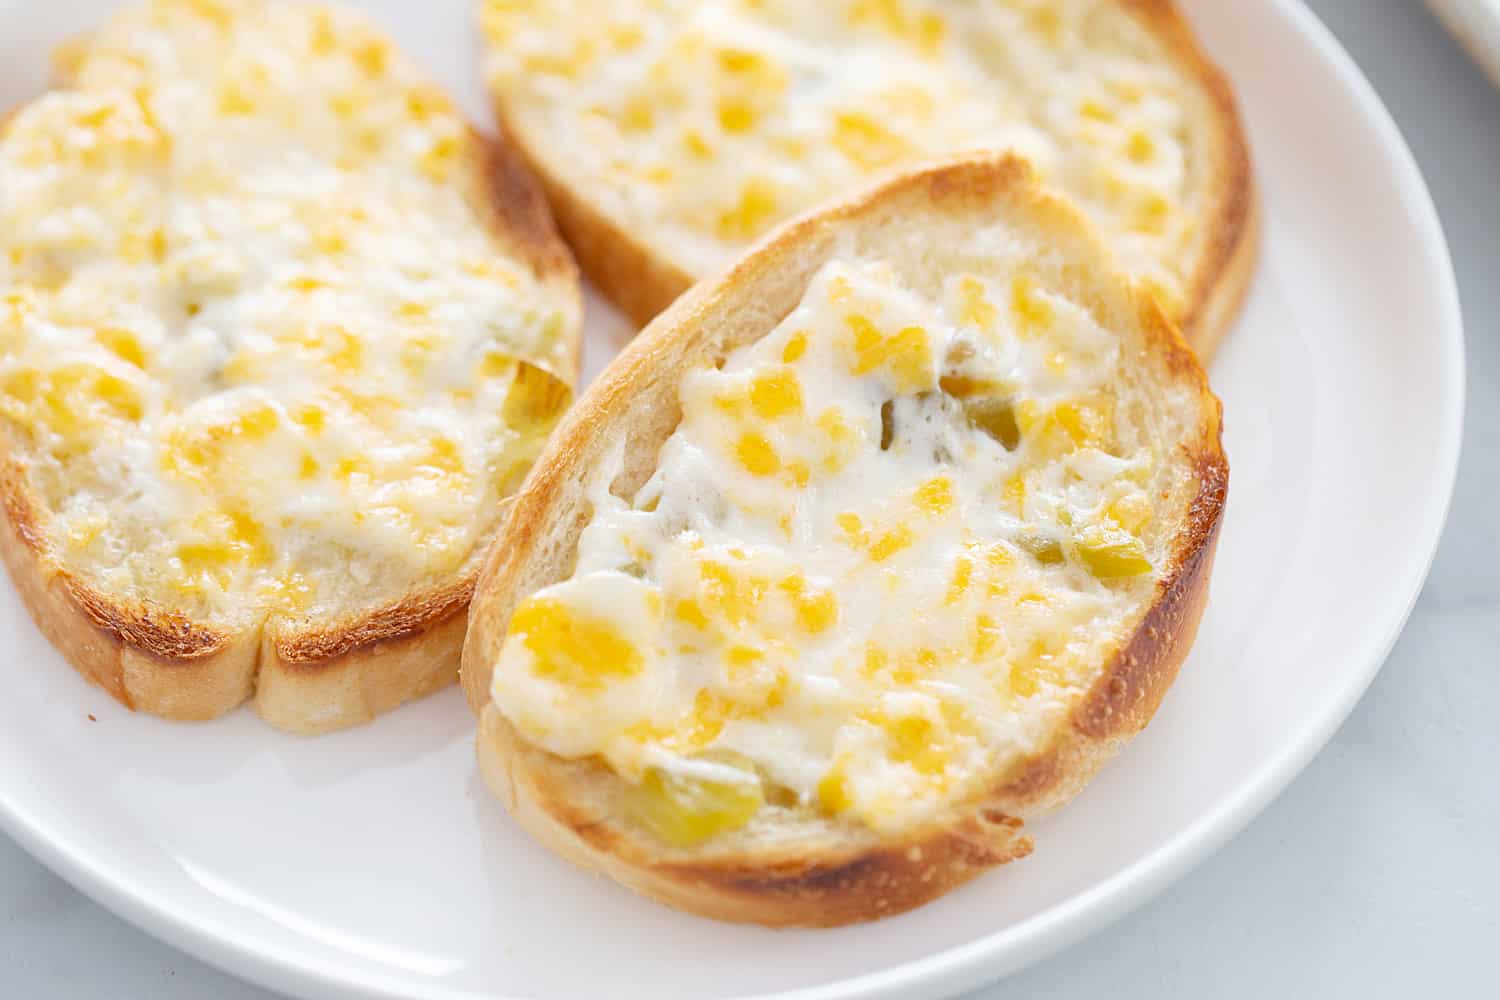 Creamy, cheesy spread with a bit of kick? Check! This zesty cheese spread is a must-have appetizer whether you're having a party of 1 or 100. | #halfscratched #appetizer #cheese #easyrecipe #hotappetizer #baking #cheesespread #easyappetizer